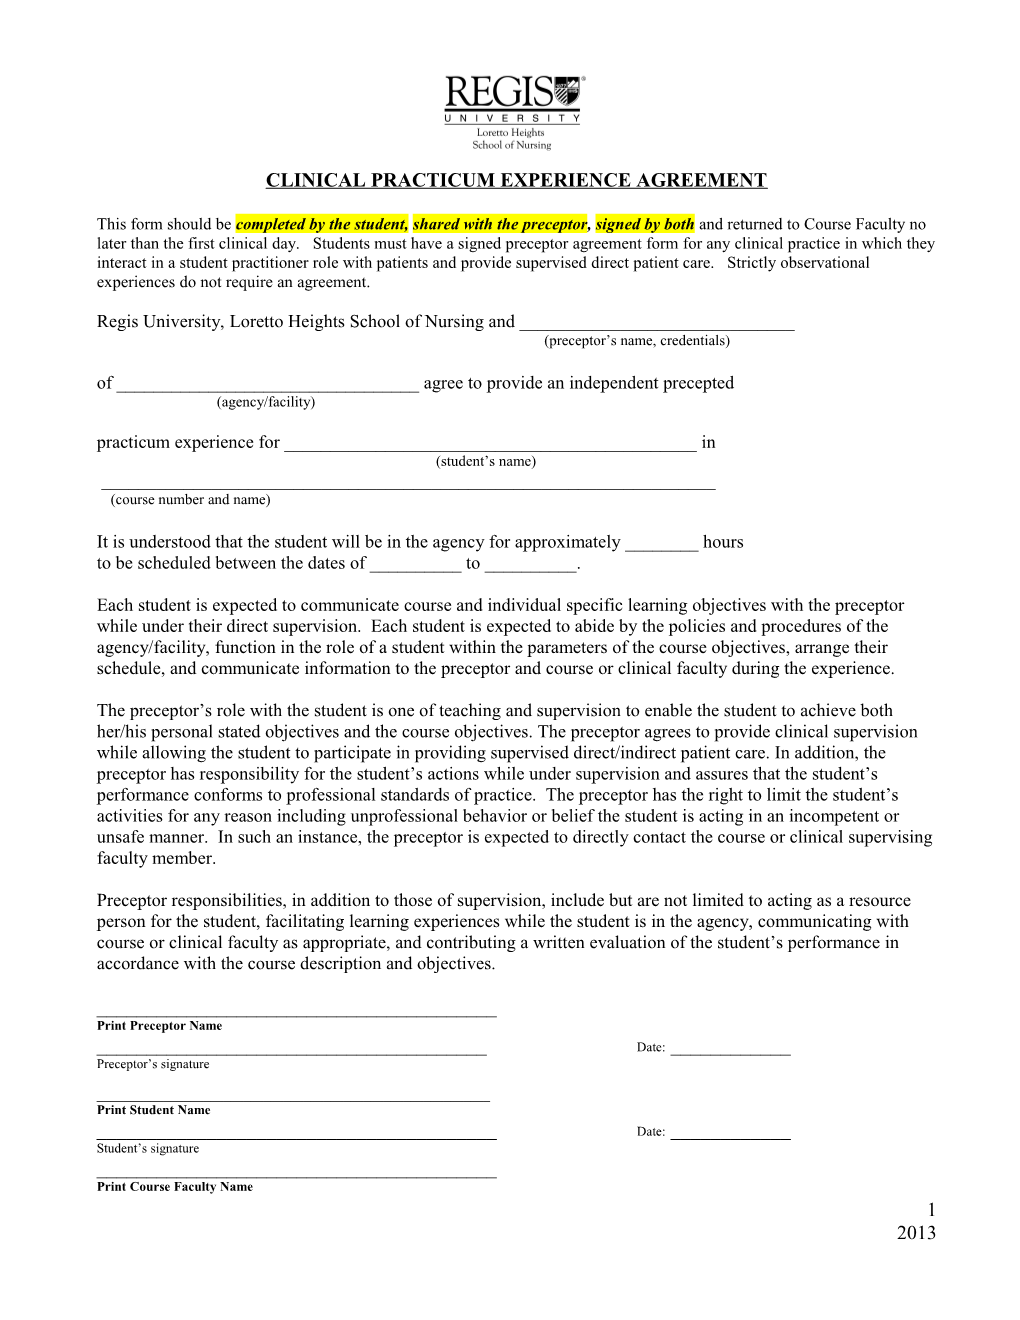 Clinical Practicum Experience Agreement